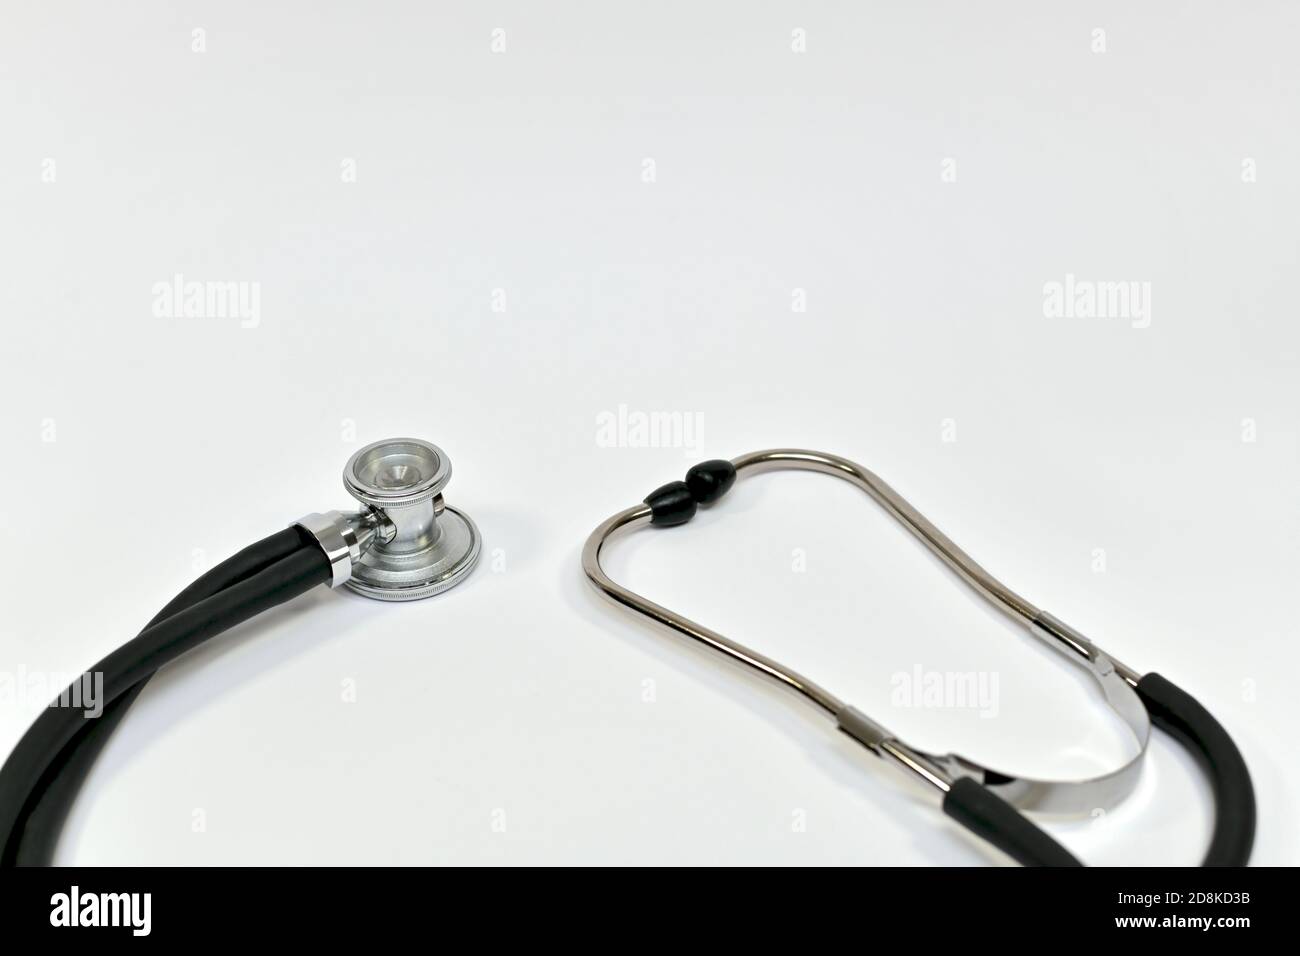 Acoustic head with binaural tubes and headband on the left and ear tips on the right medical stethoscope. Stock Photo